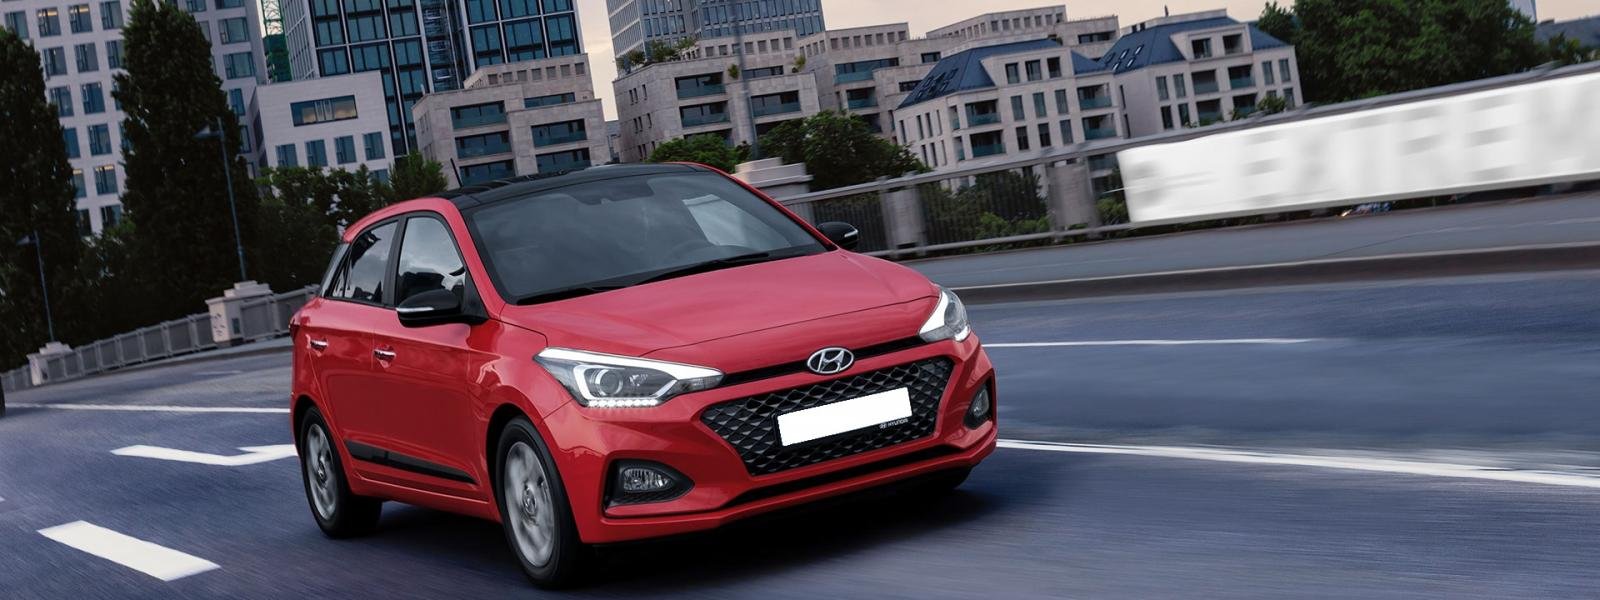 Hyundai i20 BS6 deliveries commence